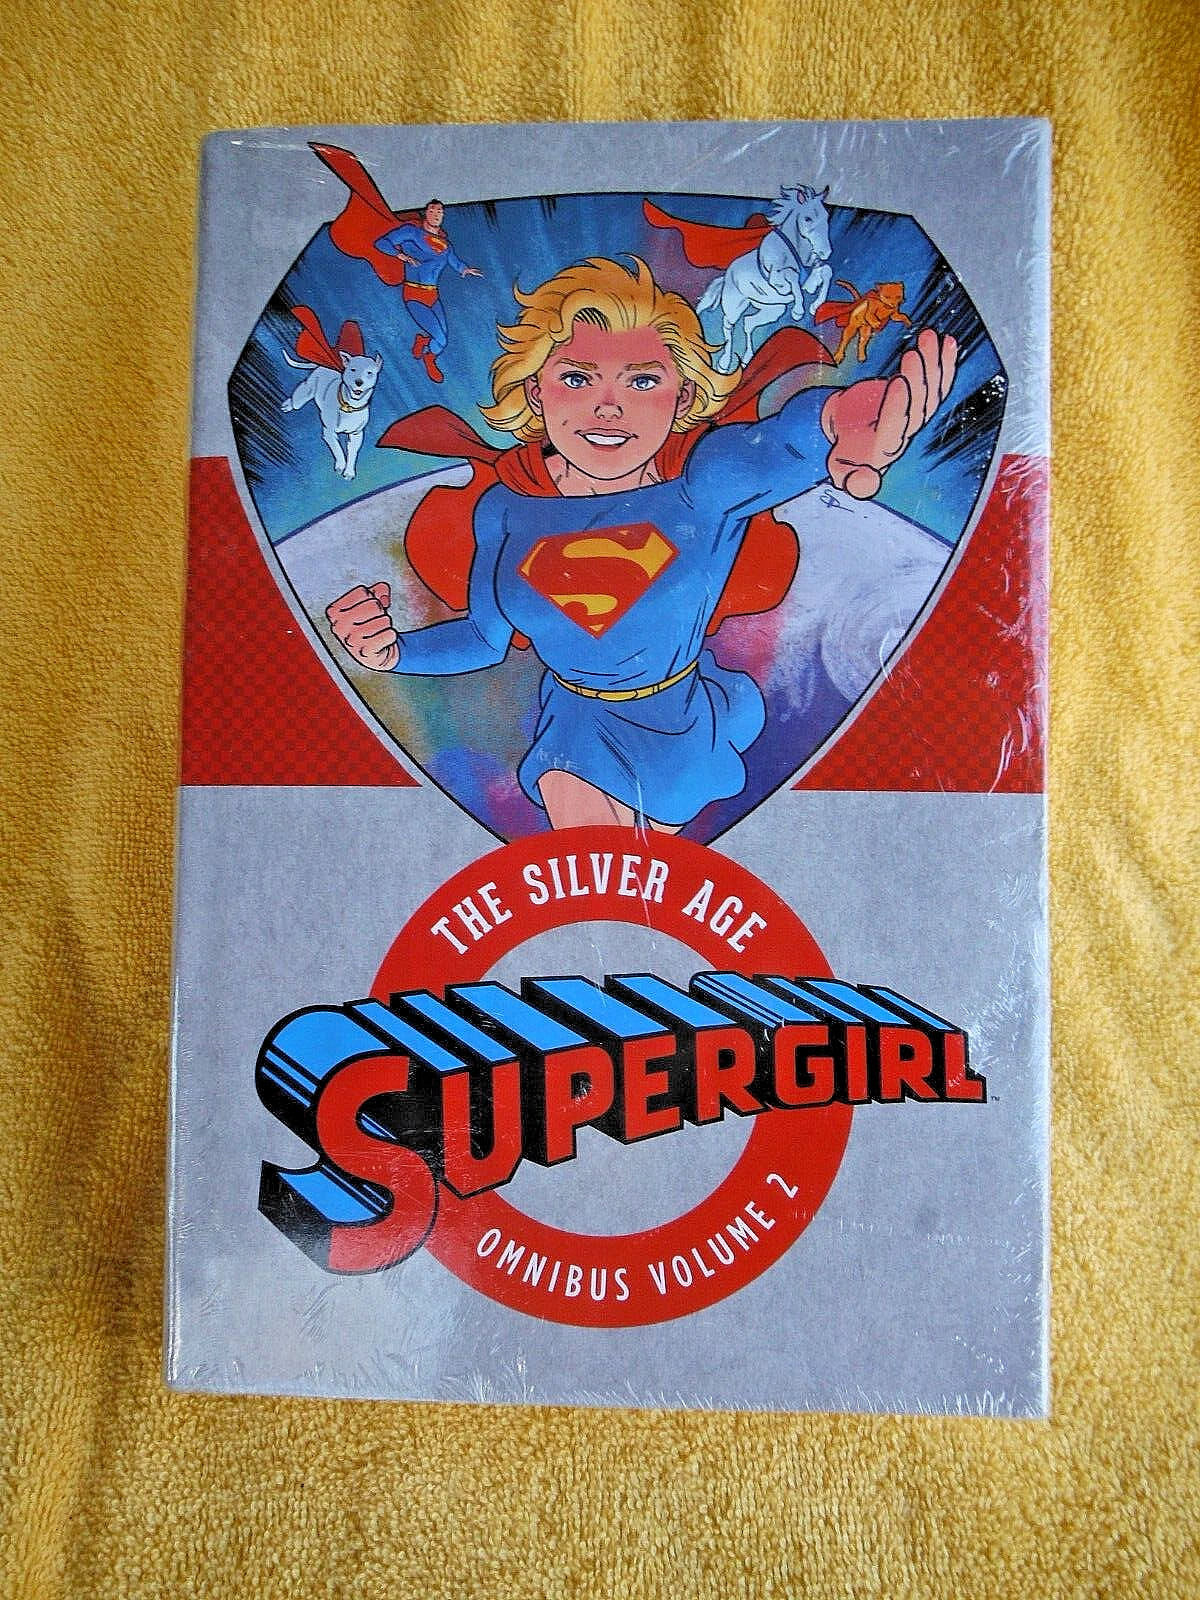 NEW/SEALED IN WRAP HARDCOVER BOOK THE SILVER AGE SUPERGIRL OMNIBUS VOL. 2 COMICS